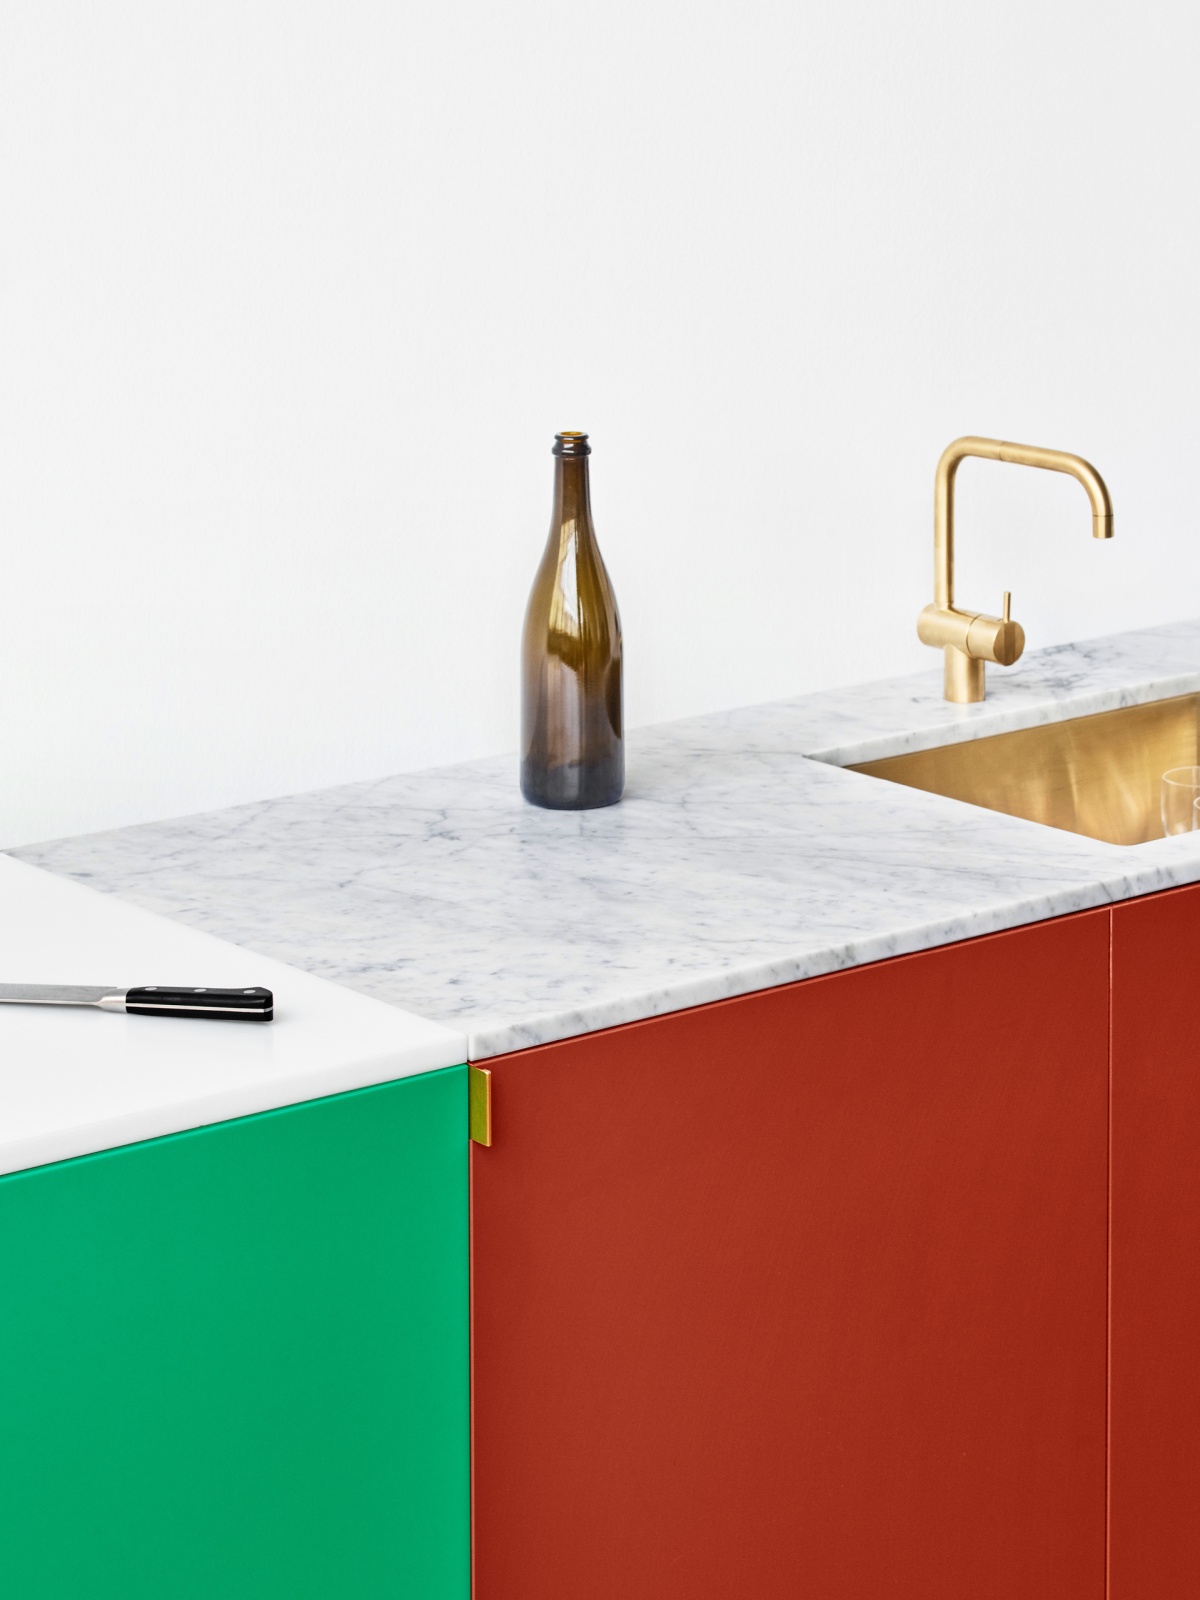 Marble countertop with brass sink